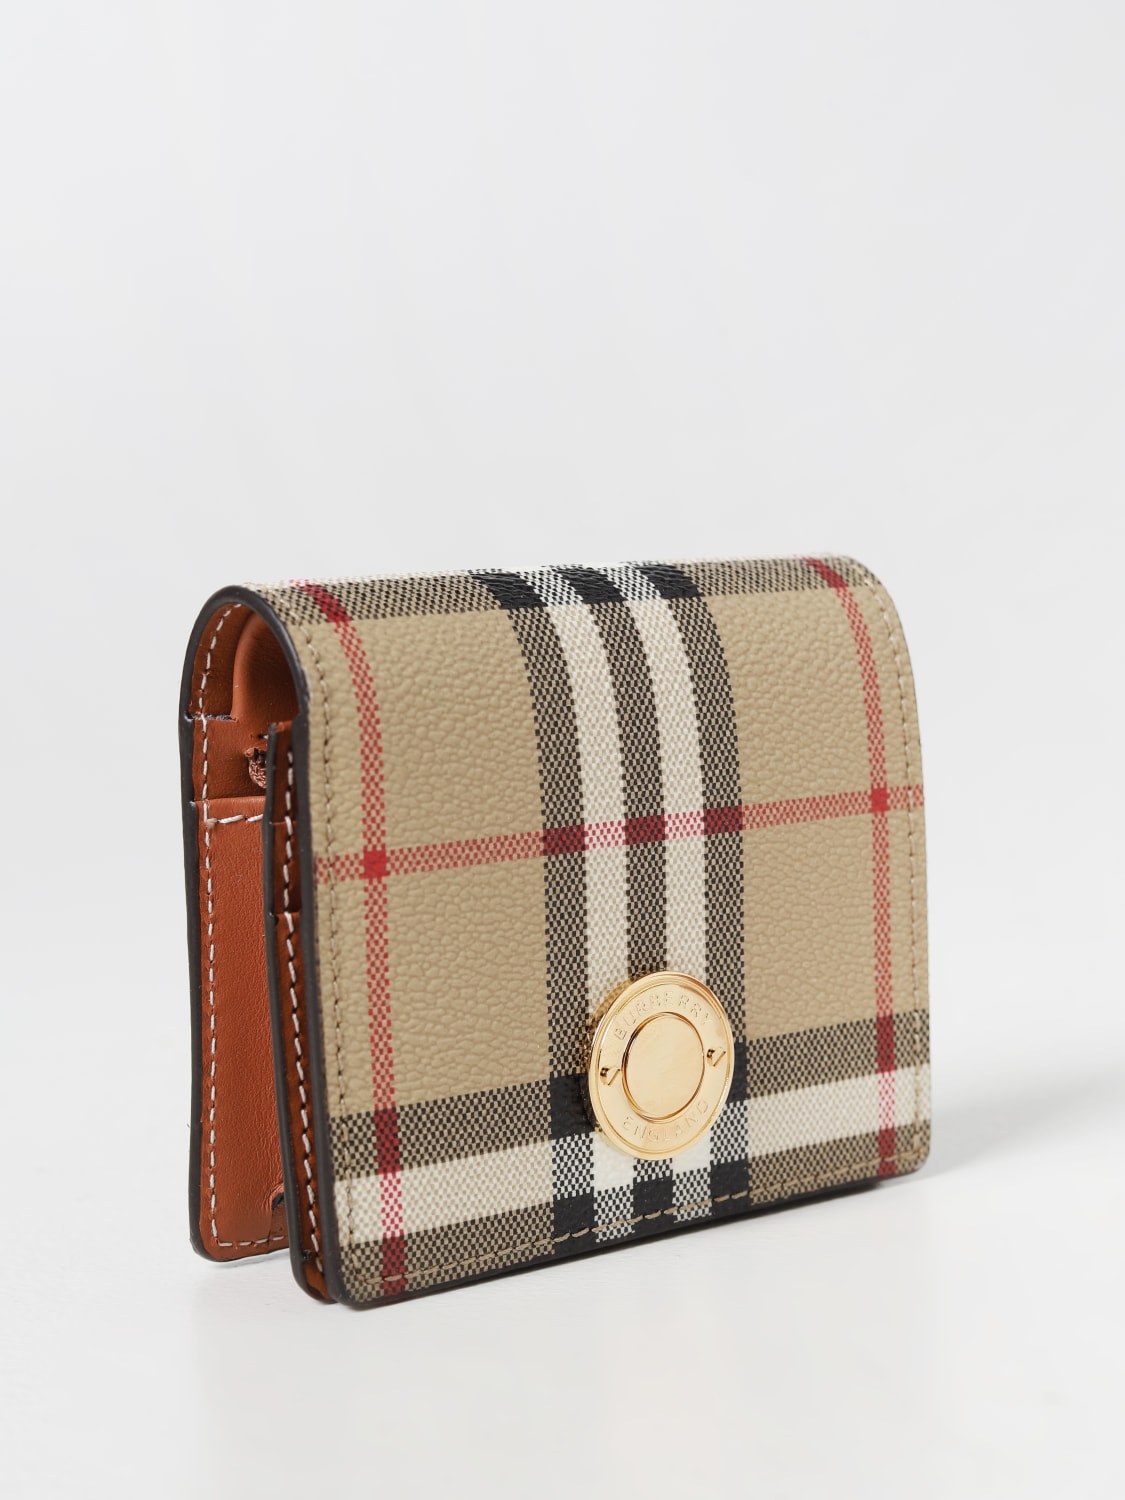 Burberry Vintage Check and Leather Coin Case